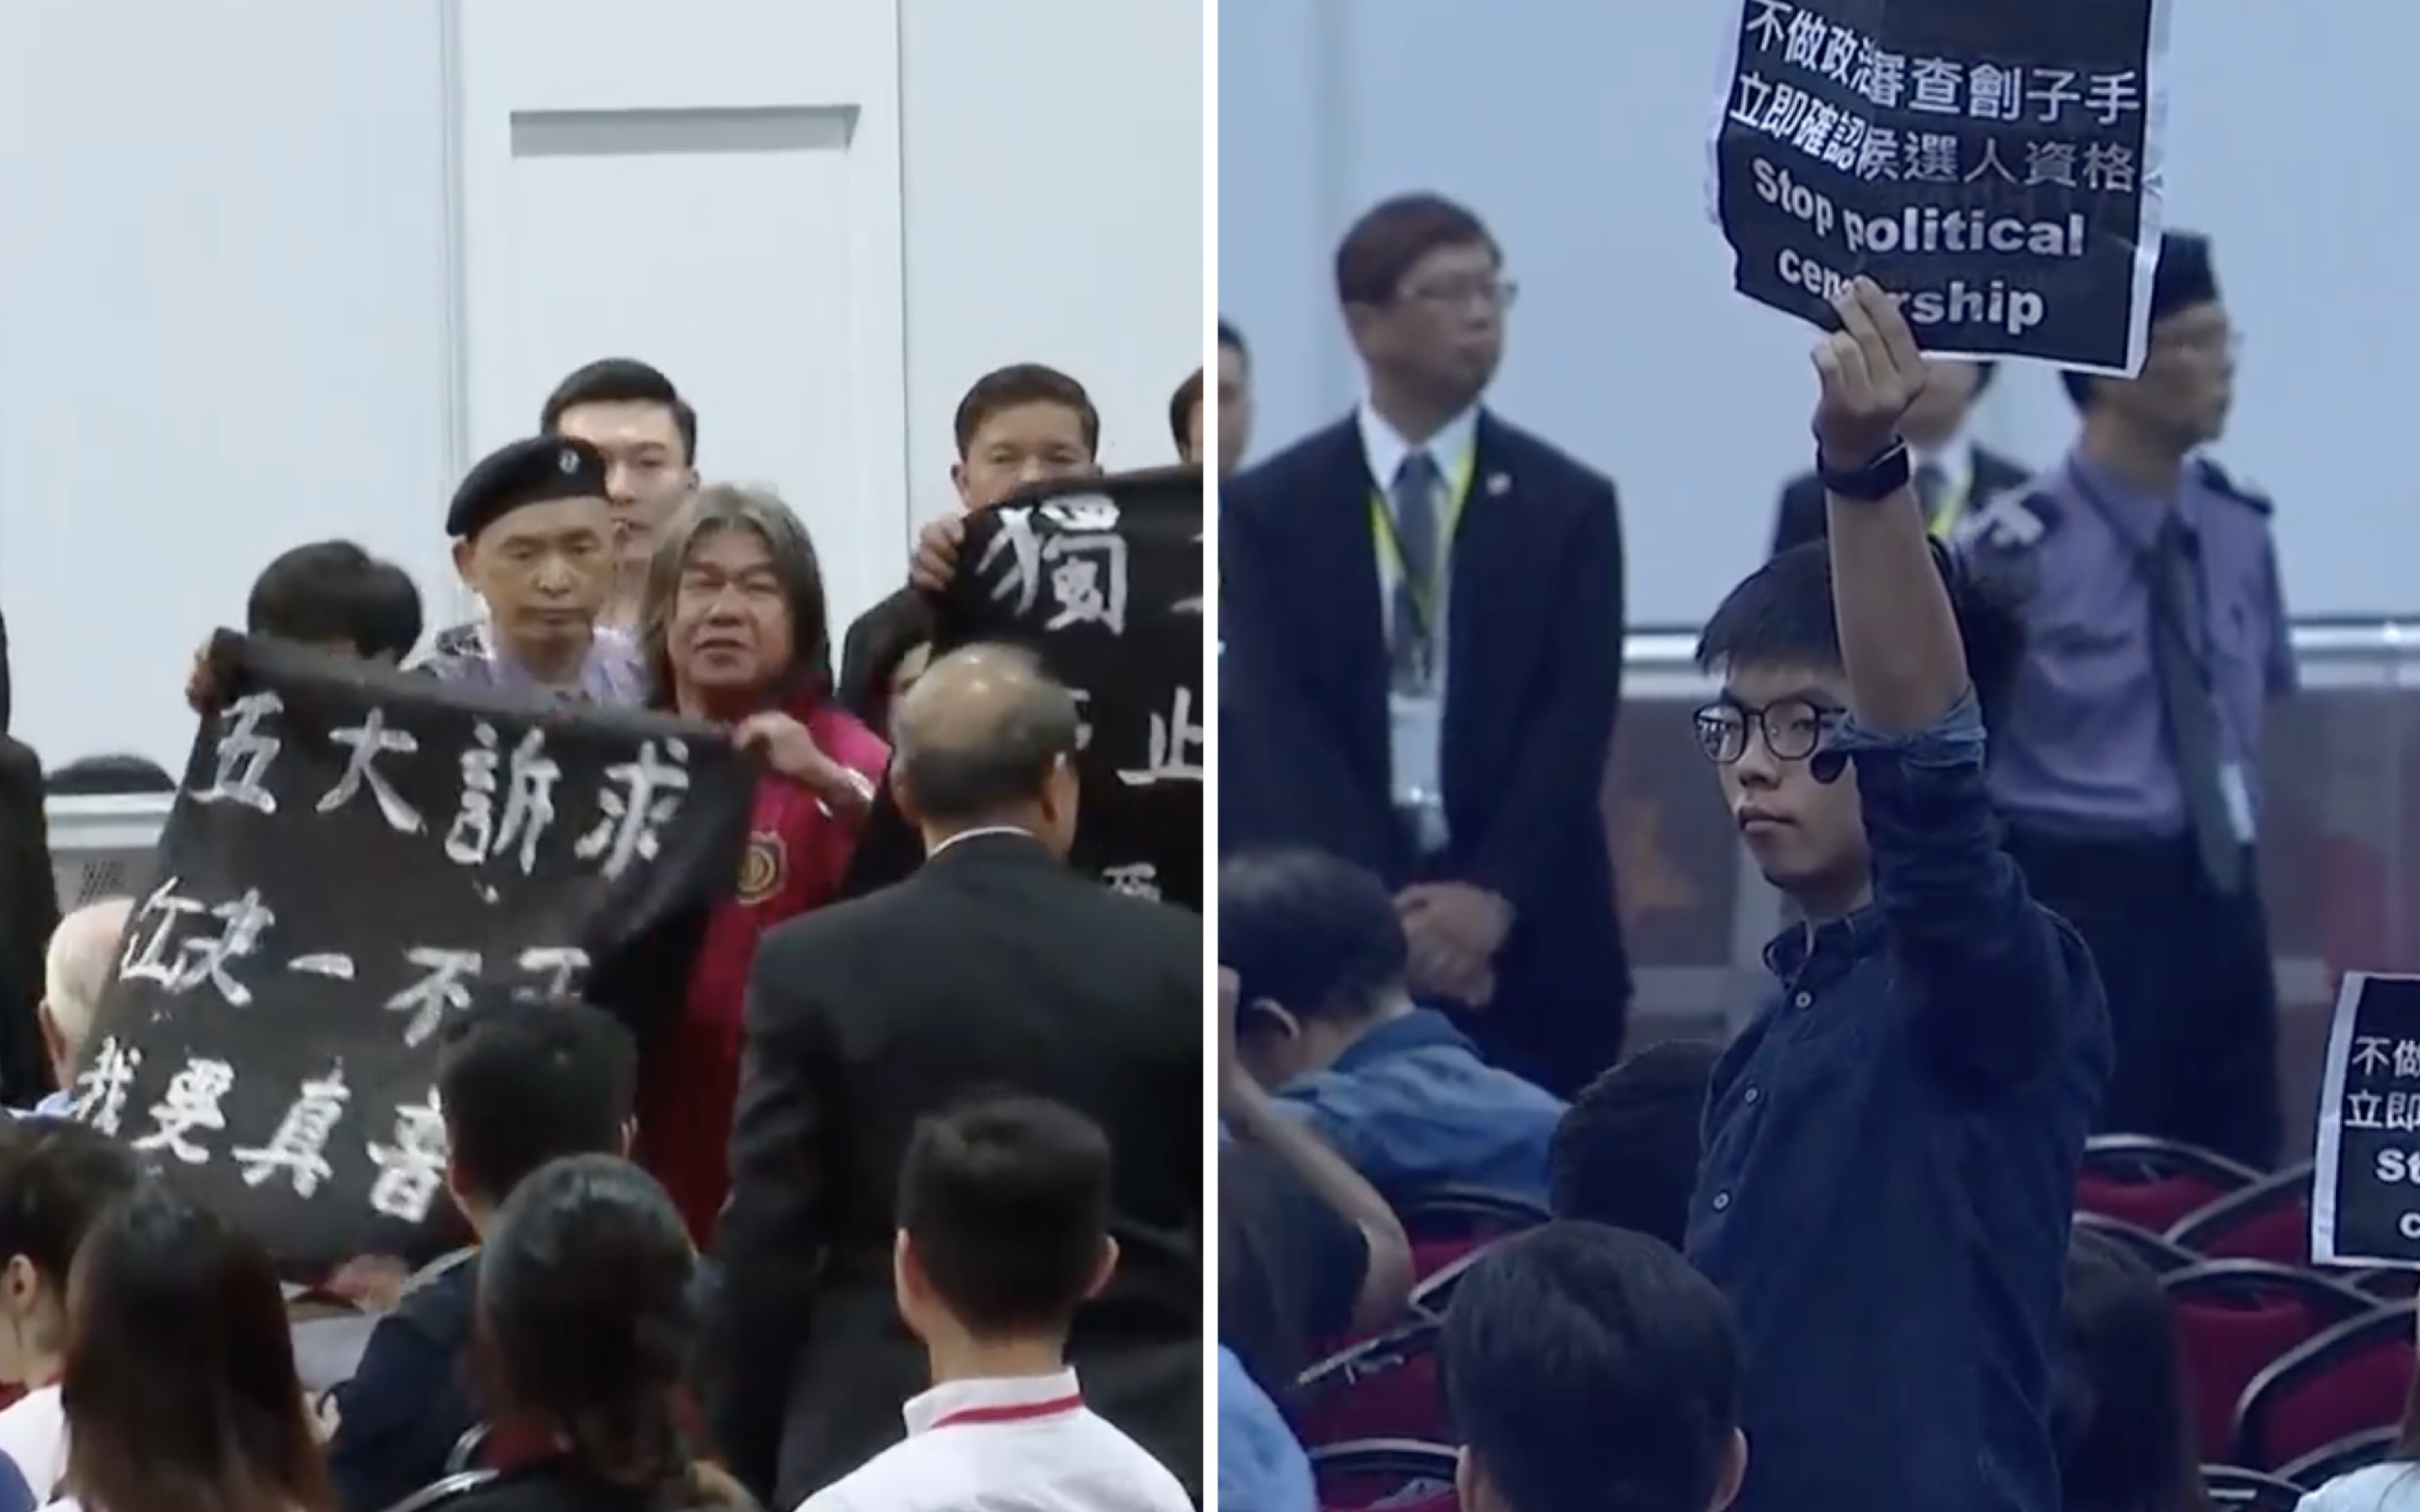 Leung Kwok-hung and Joshua Wong joined pro-democracy candidates in disrupting a briefing for district council elections candidates after elections officials failed to make a decision on Wong’s candidacy for district council. Screengrabs via Facebook/RTHK.